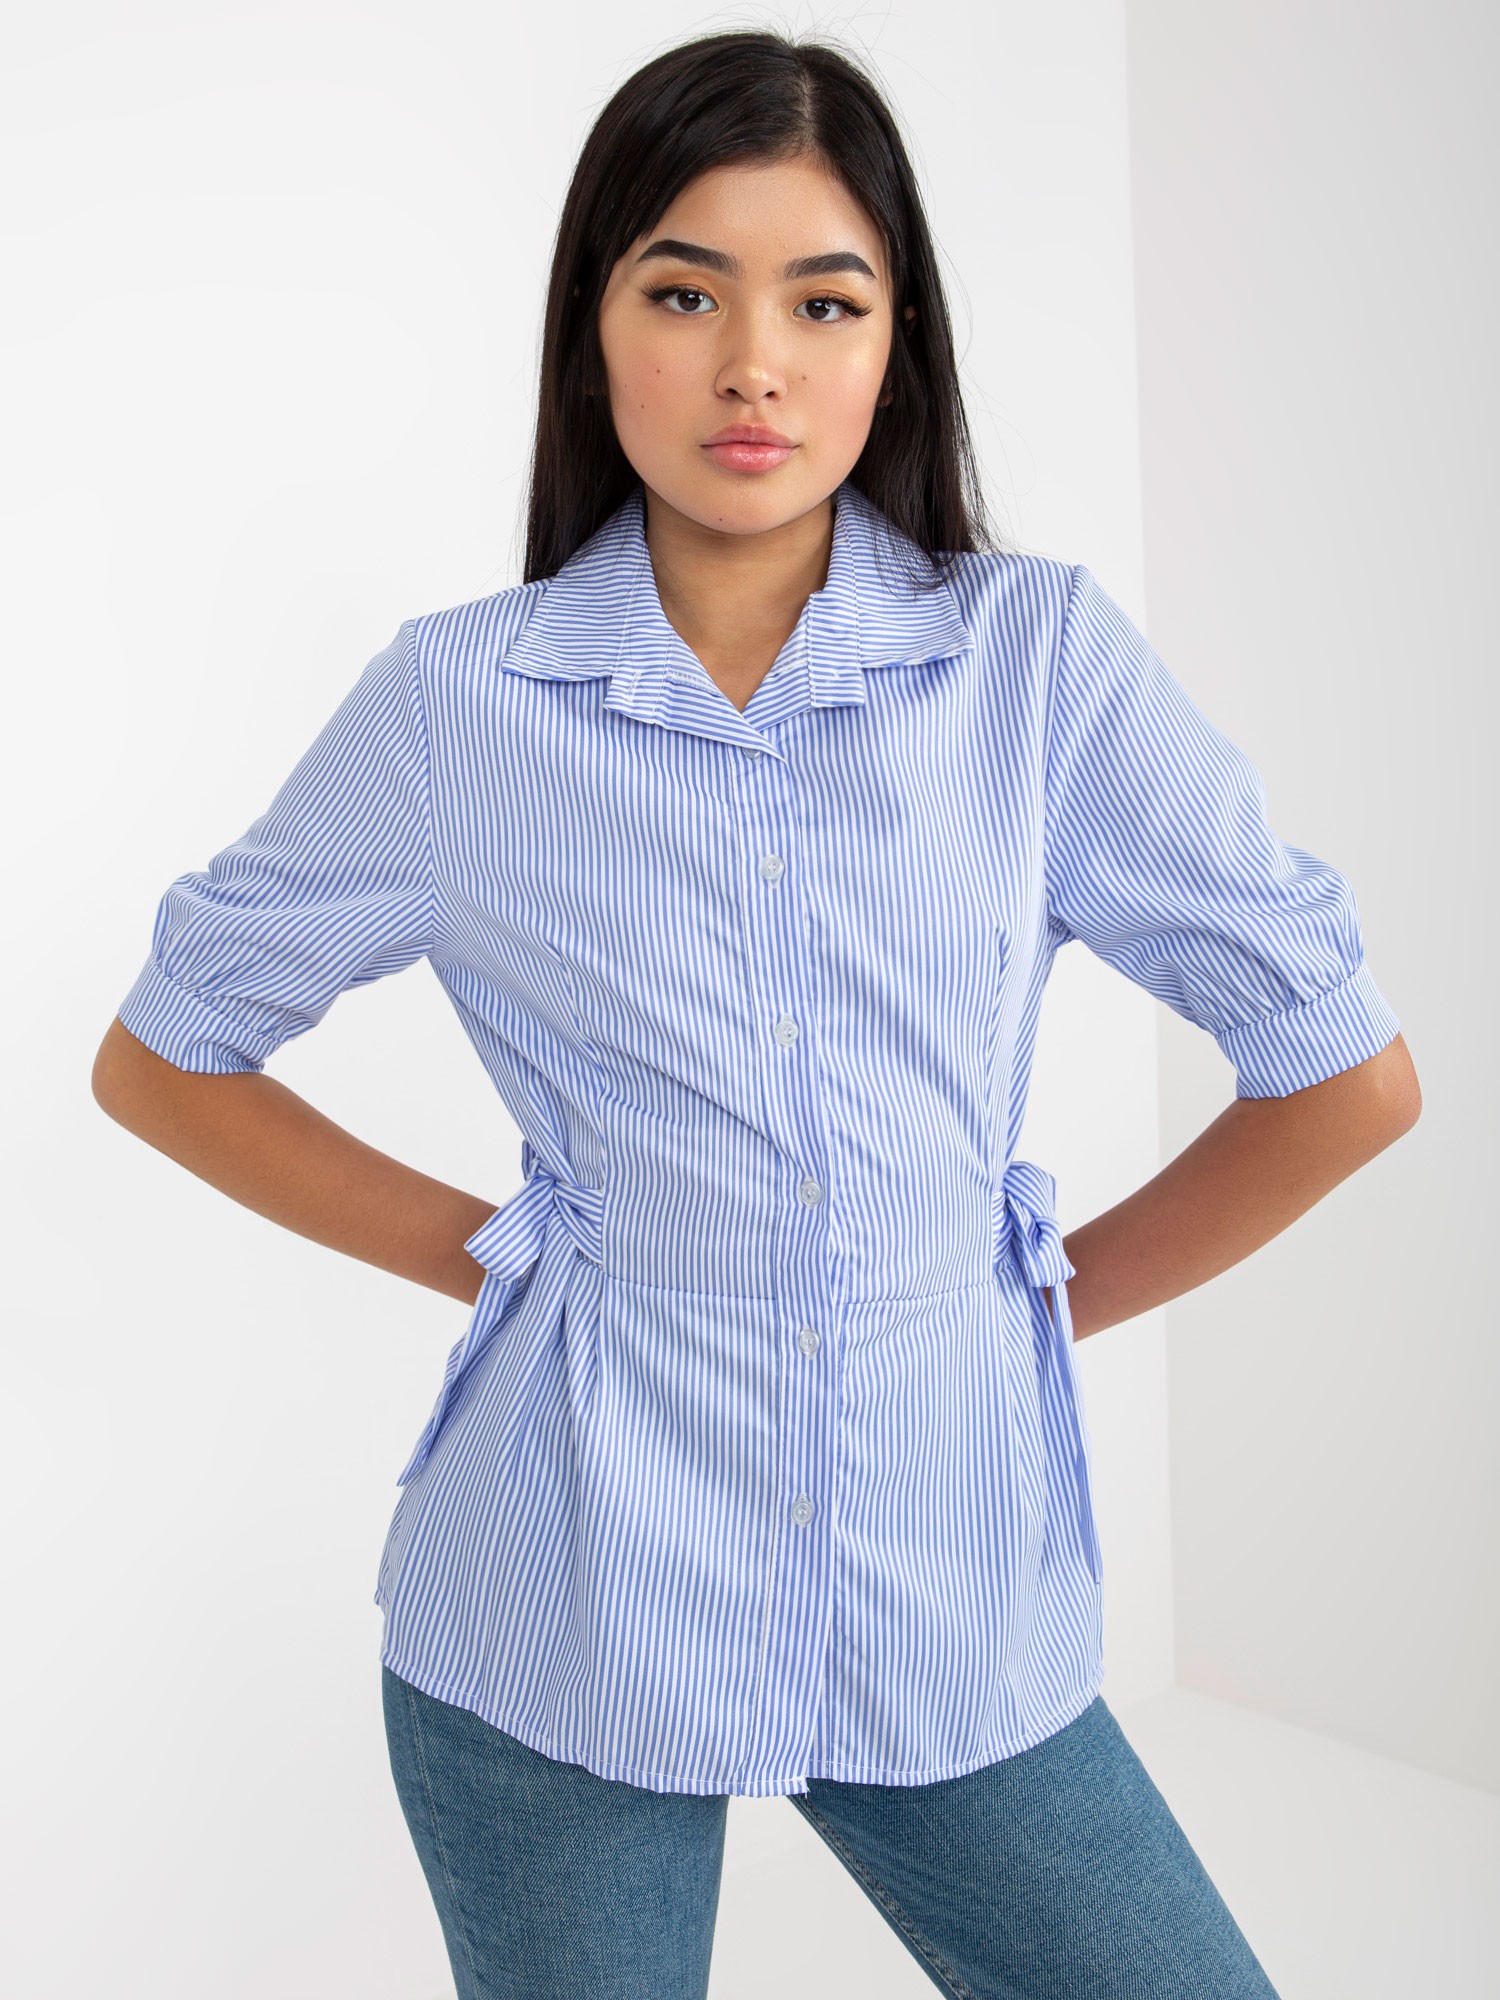 Lady's Striped Shirt with Tie - Blue